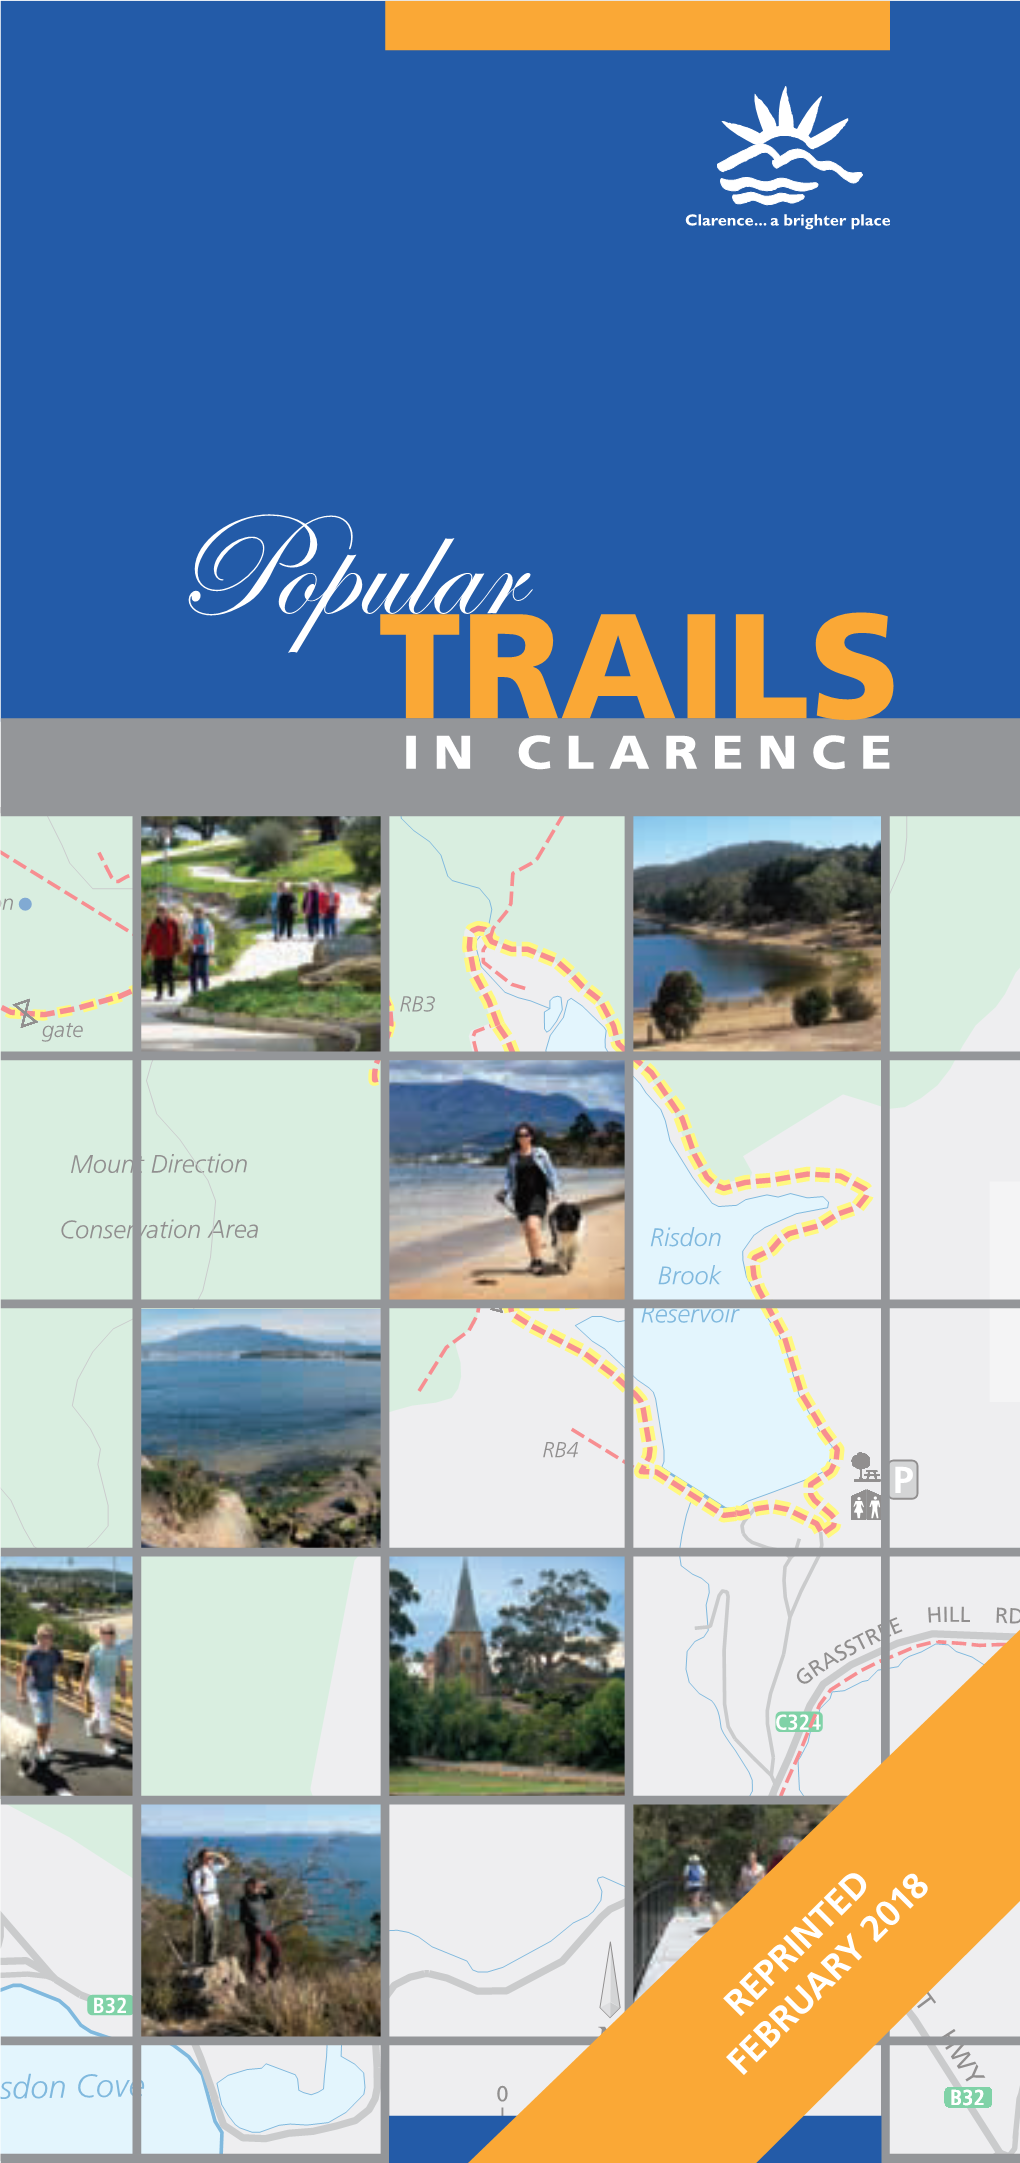 Trails in Clarence